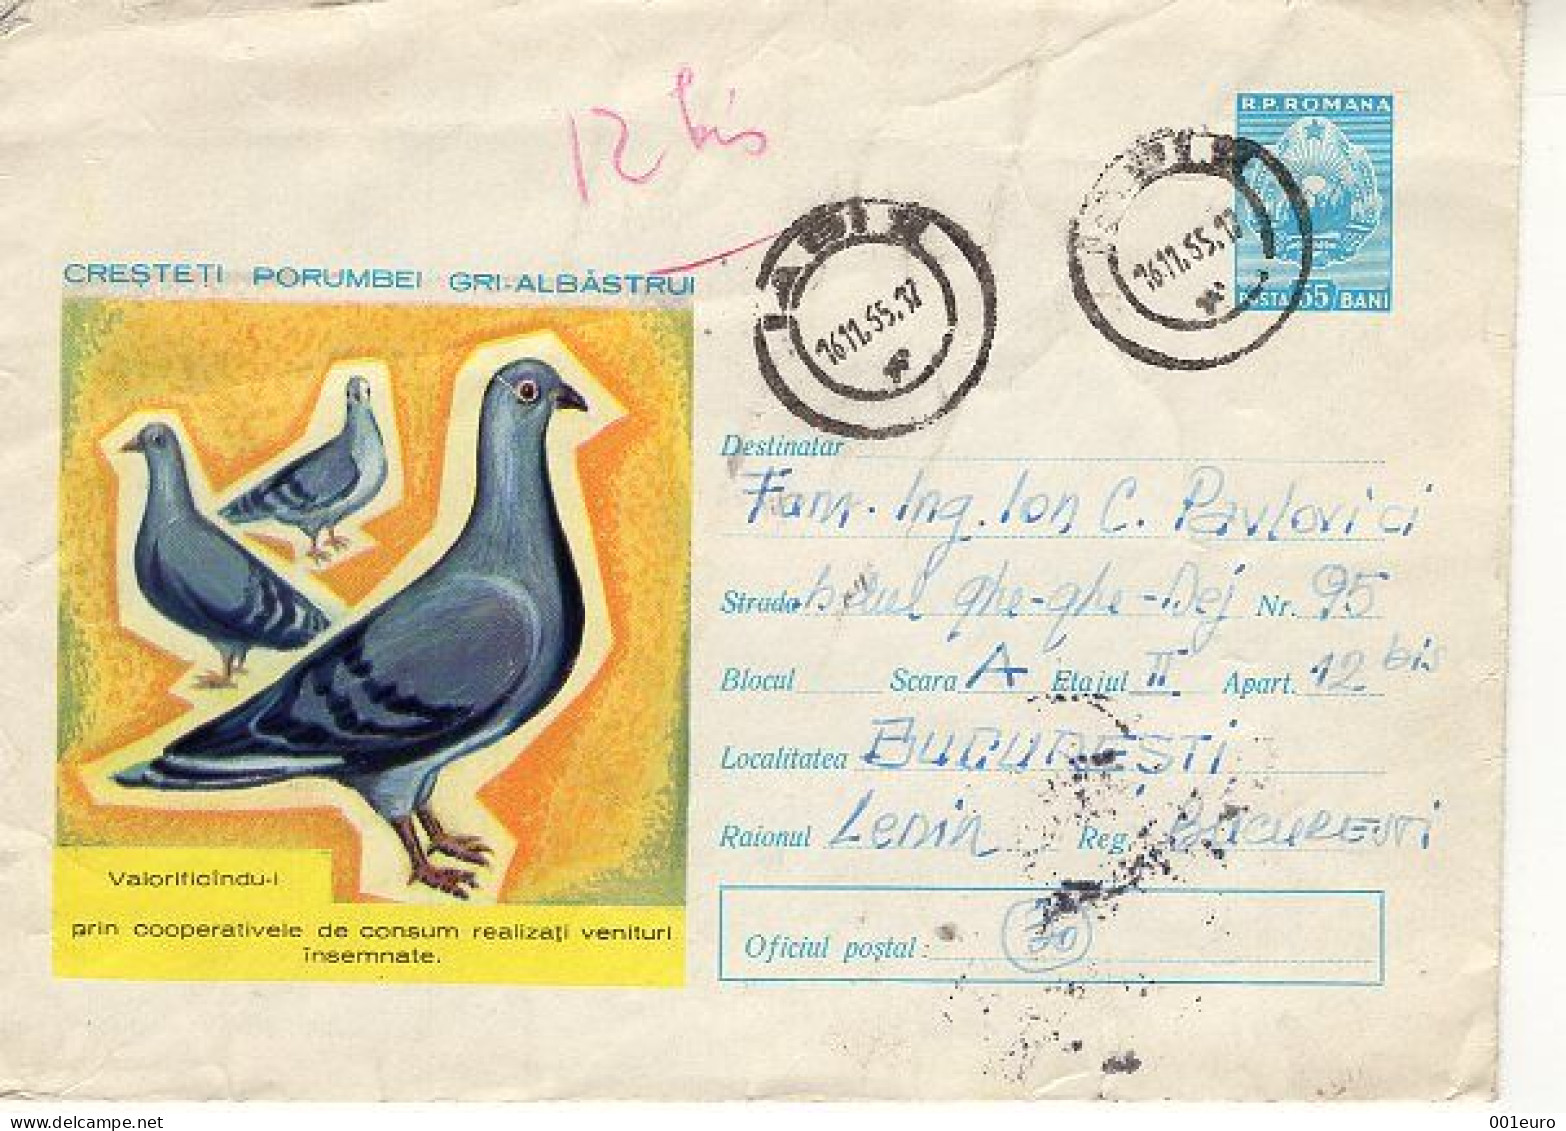 ROMANIA 393y1963: Birds - PIGEONS, Used Prepaid Postal Stationery Cover - Registered Shipping! - Ganzsachen